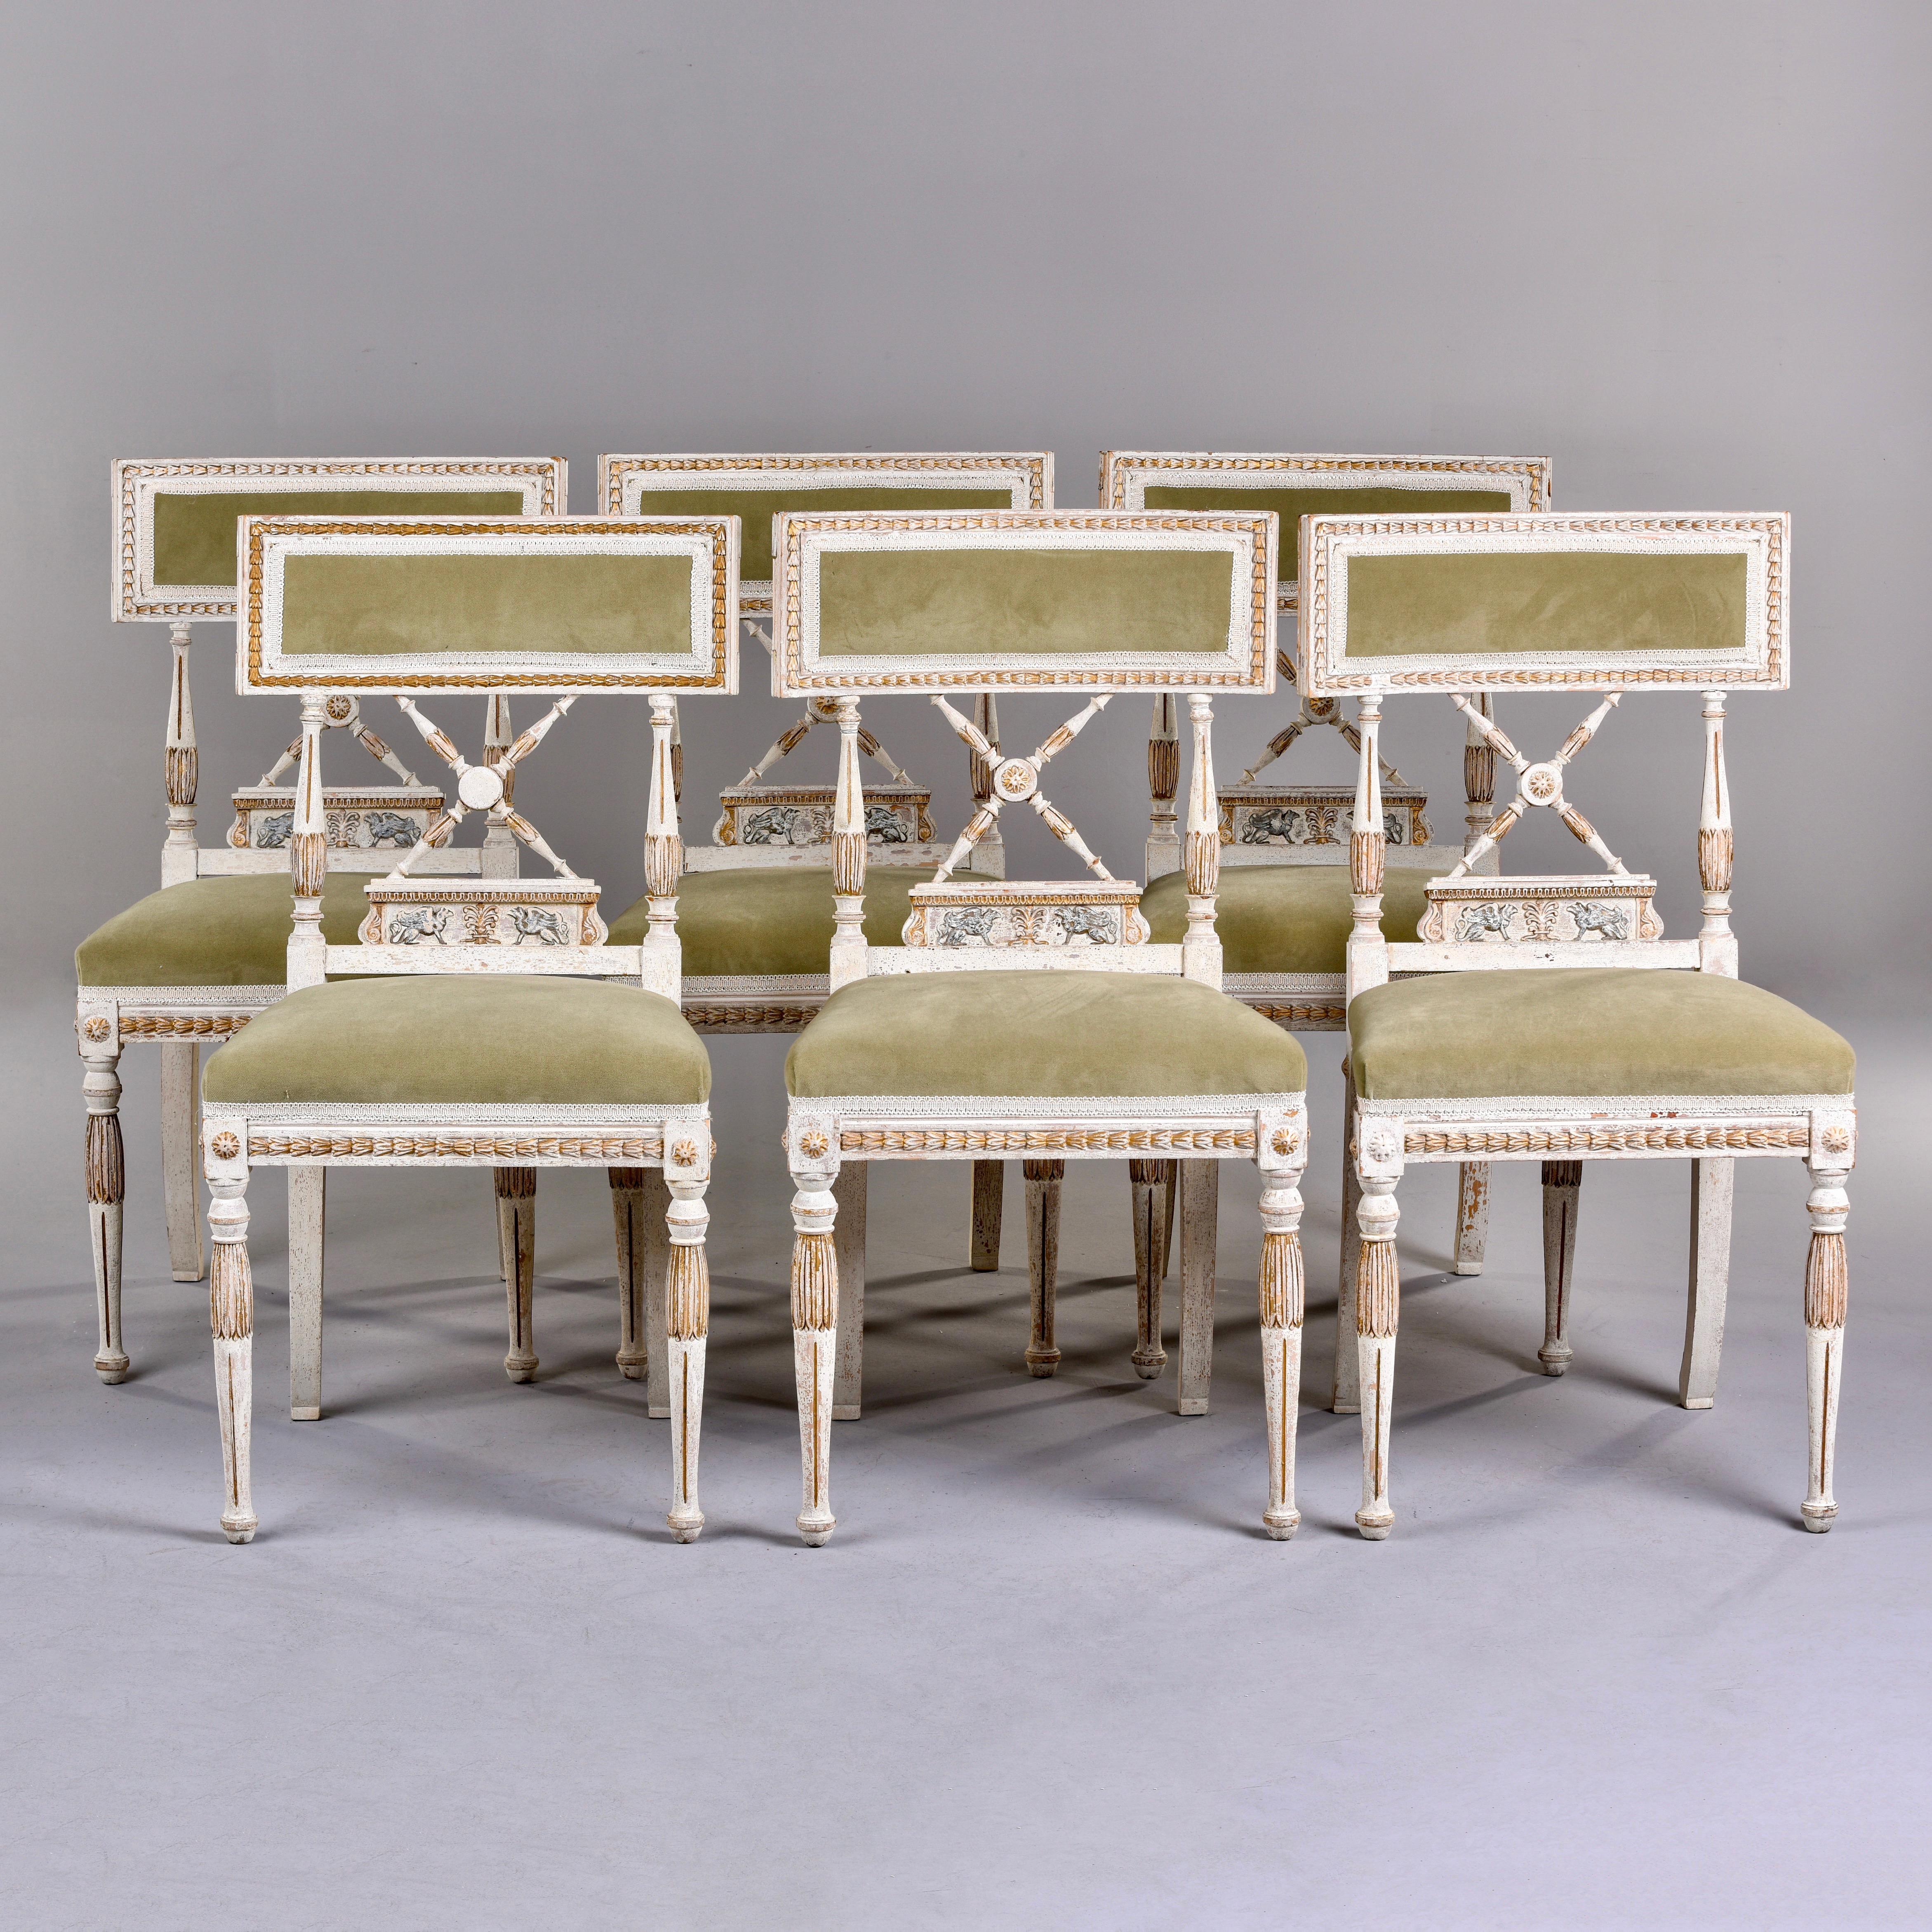 Circa 1900 Swedish set of six dining chairs in traditional style with carved a gilded details. New upholstery in sage colored short-nap commercial velvet. Very good vintage condition. Coordinating settee listed under separate listing.